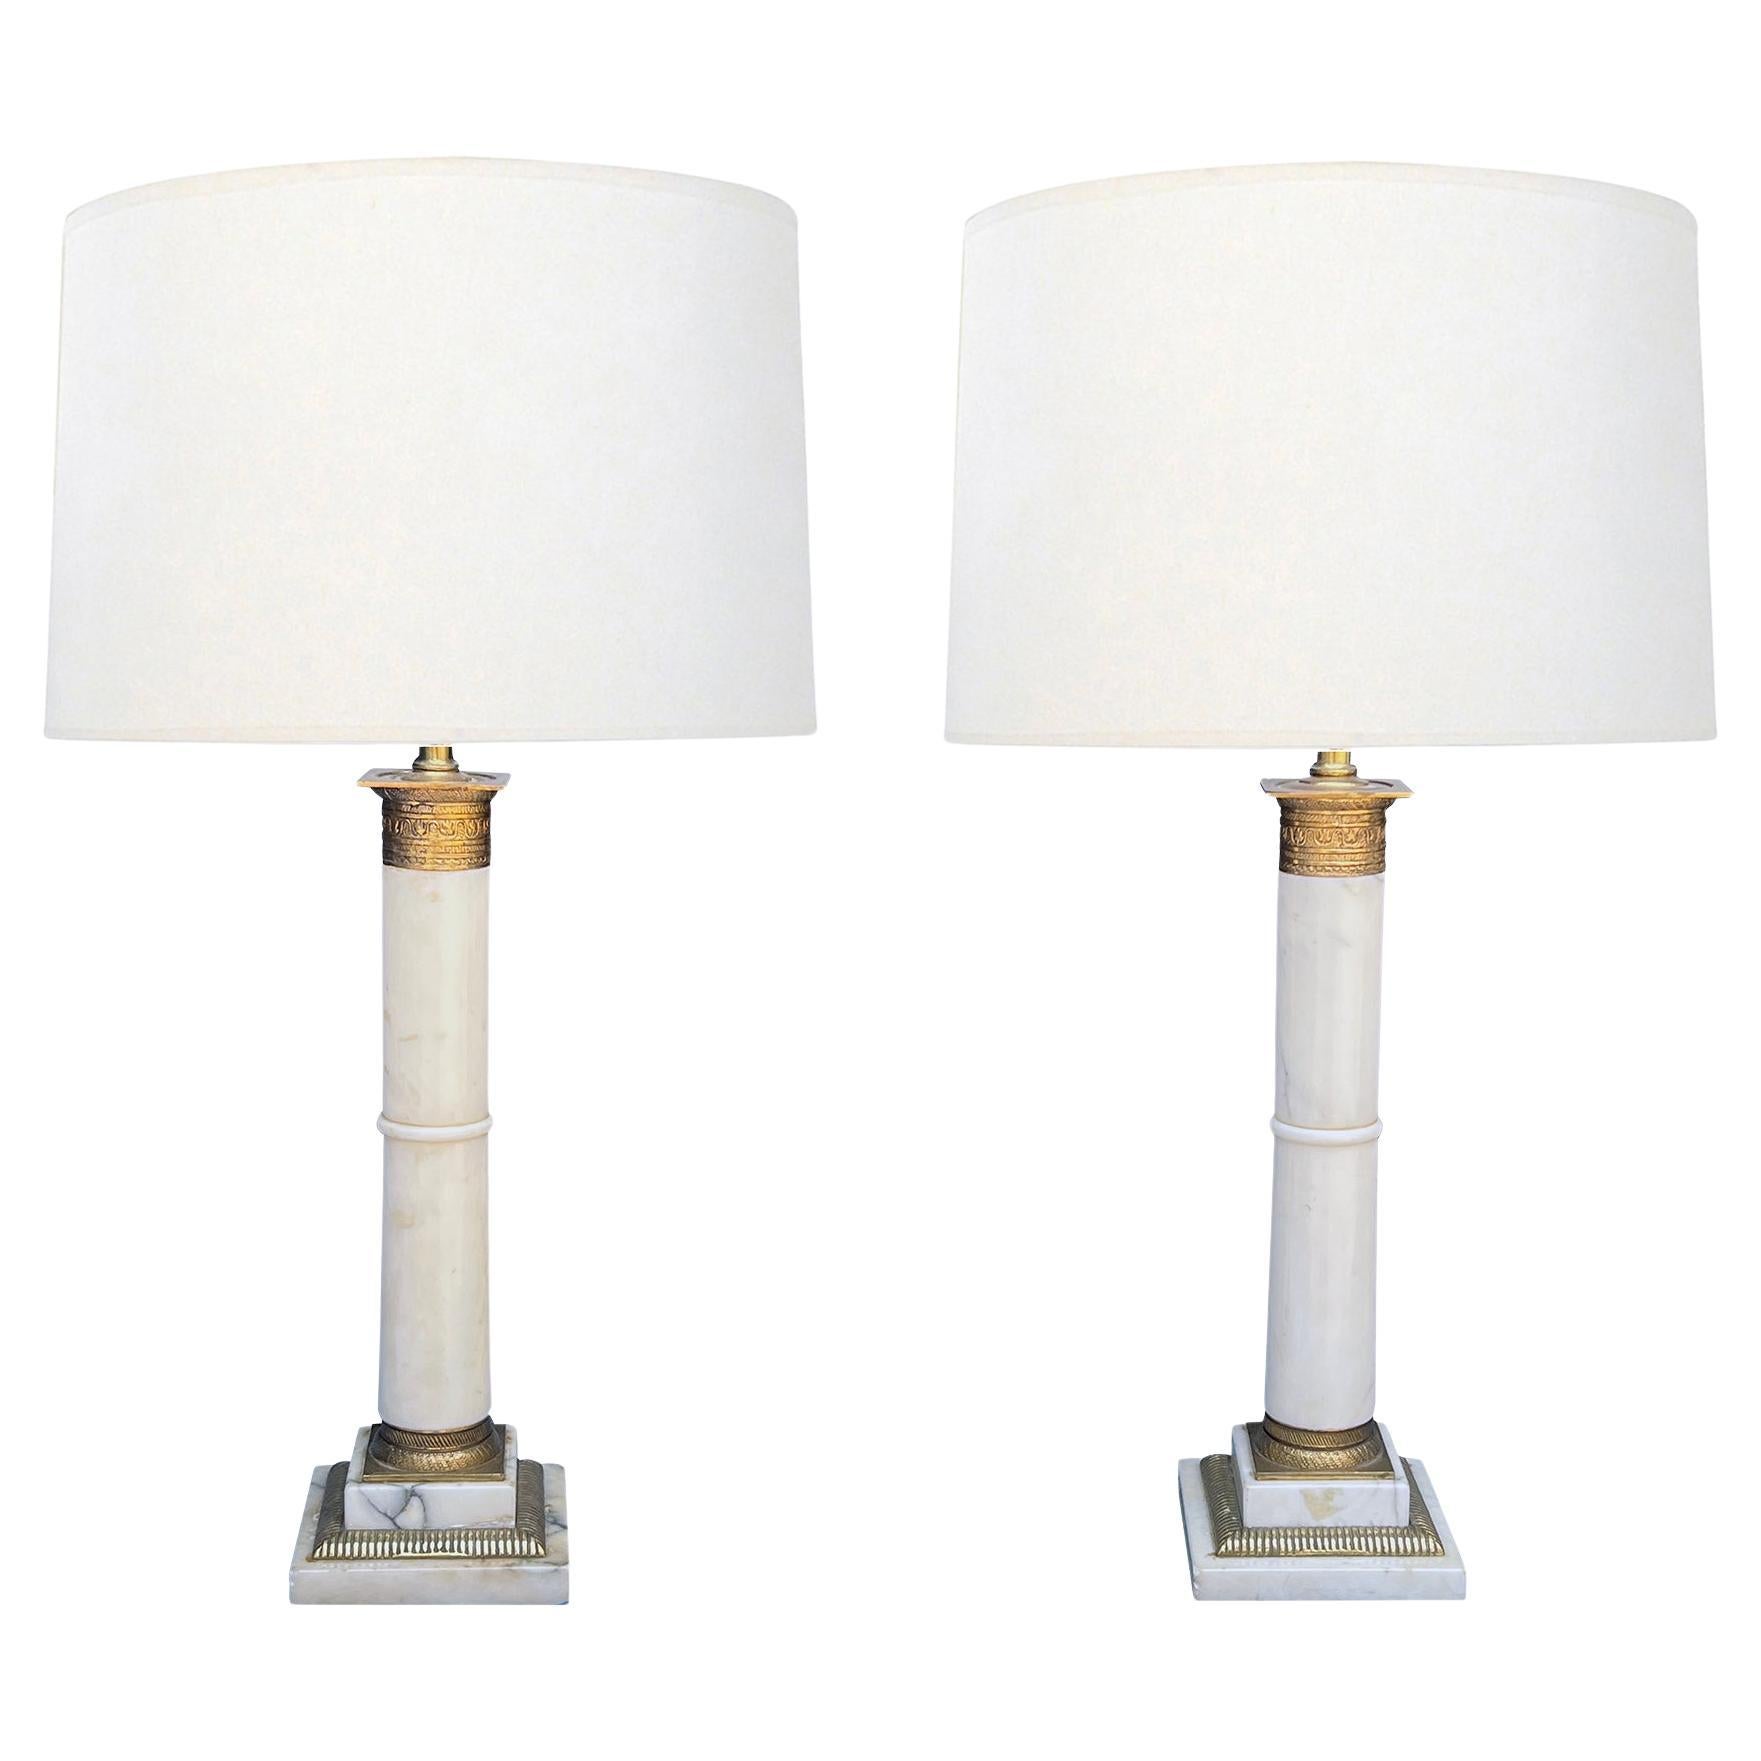 Pair of American 1950s Neoclassical Style Carrera Marble Columnar Lamps For Sale